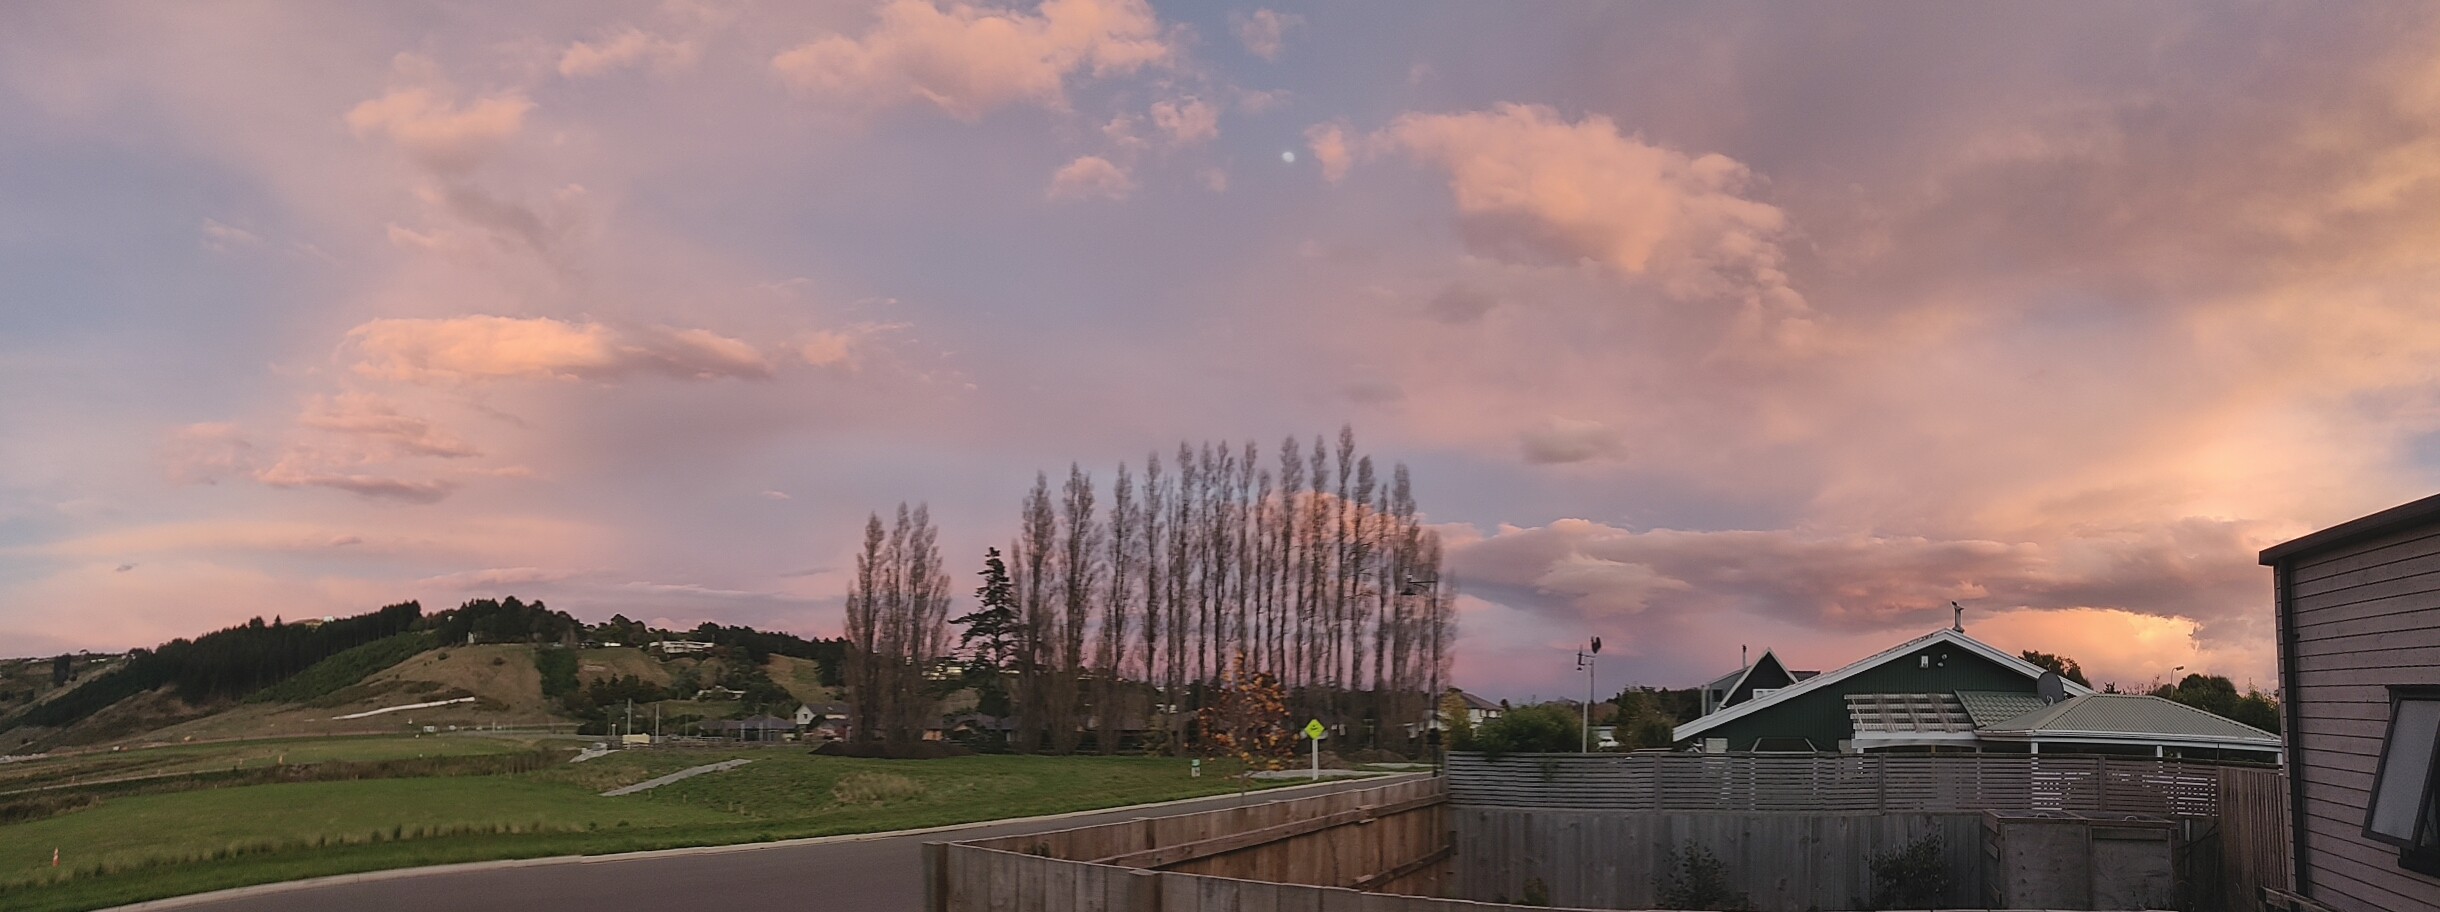 A stunning morning sky (which subsequently turned to serious rain) in Christchurch/Ōtautahi, New Zealand/Aotearoa